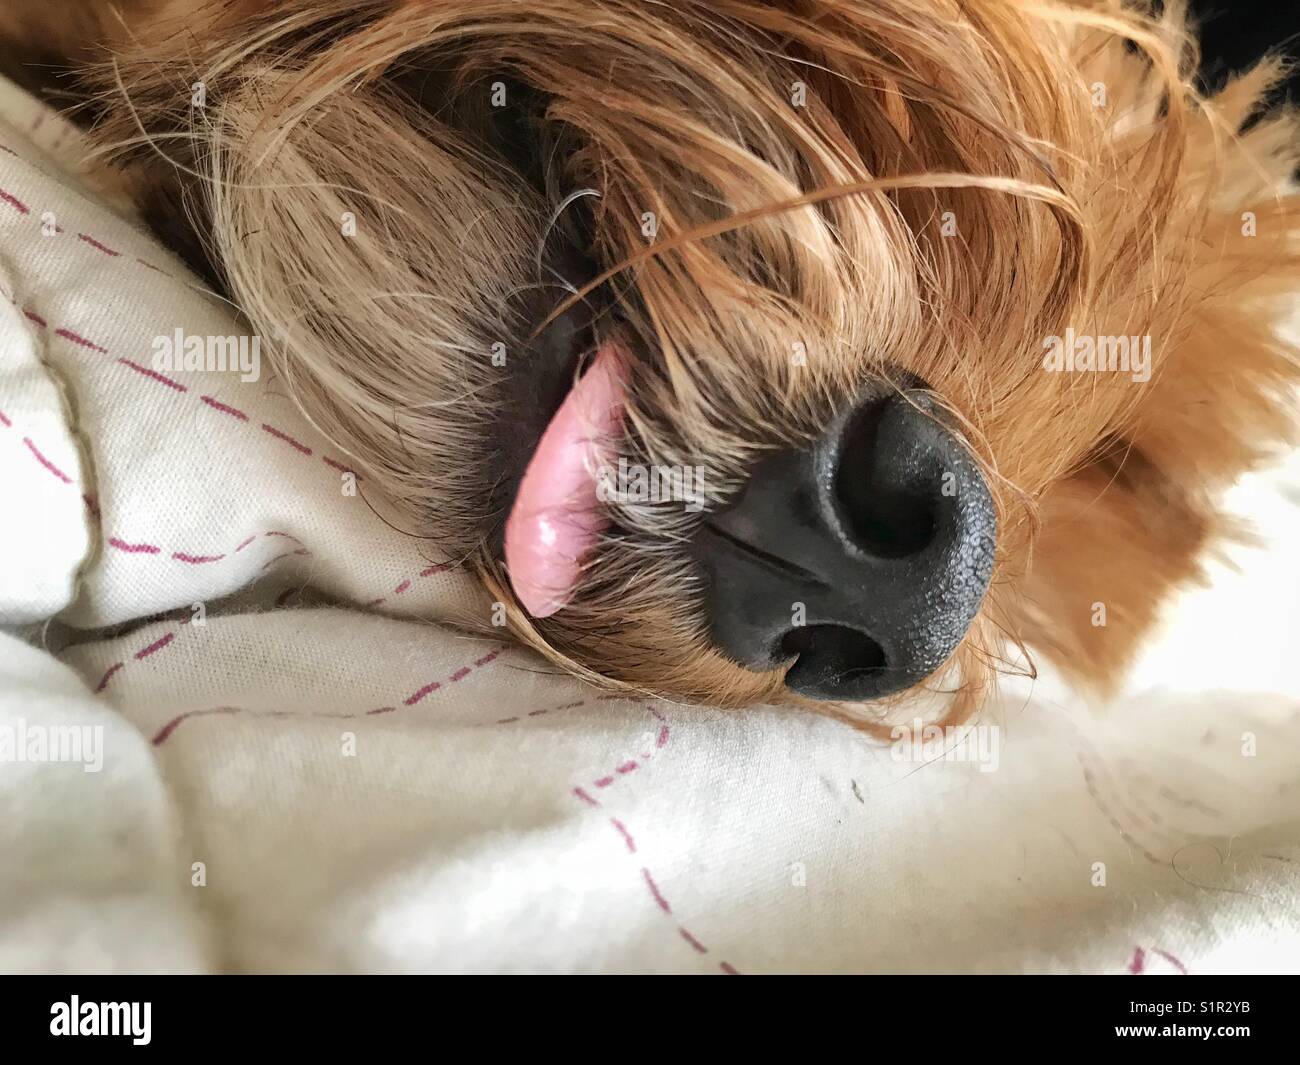 Dog’s snout closeup with a bit of the tongue outside Stock Photo